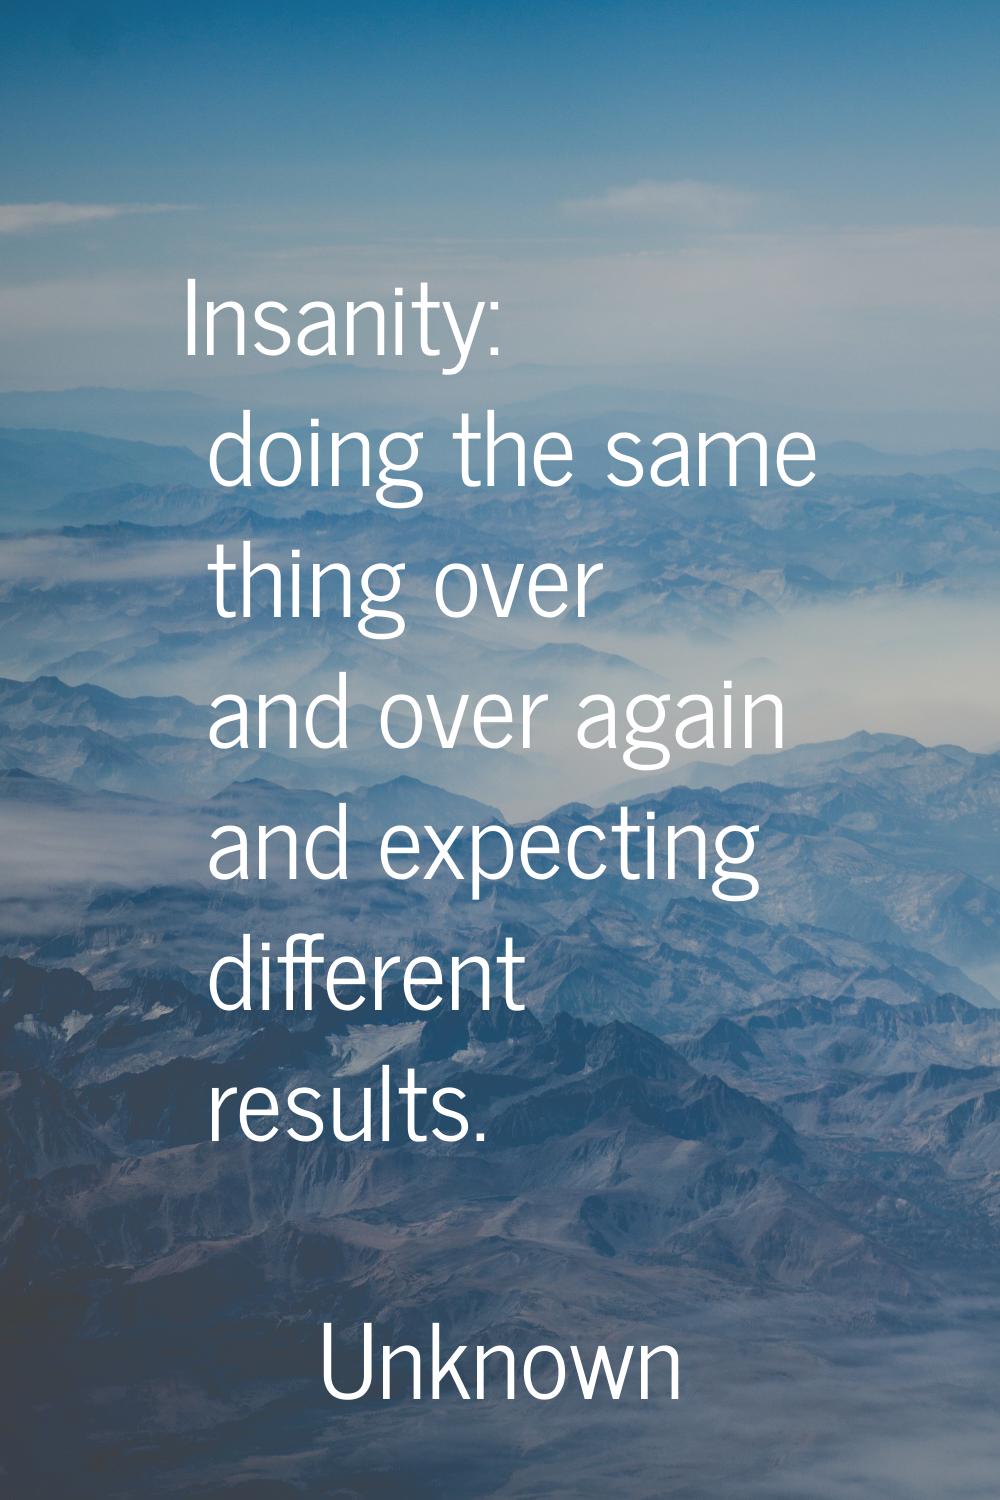 Insanity: doing the same thing over and over again and expecting different results.